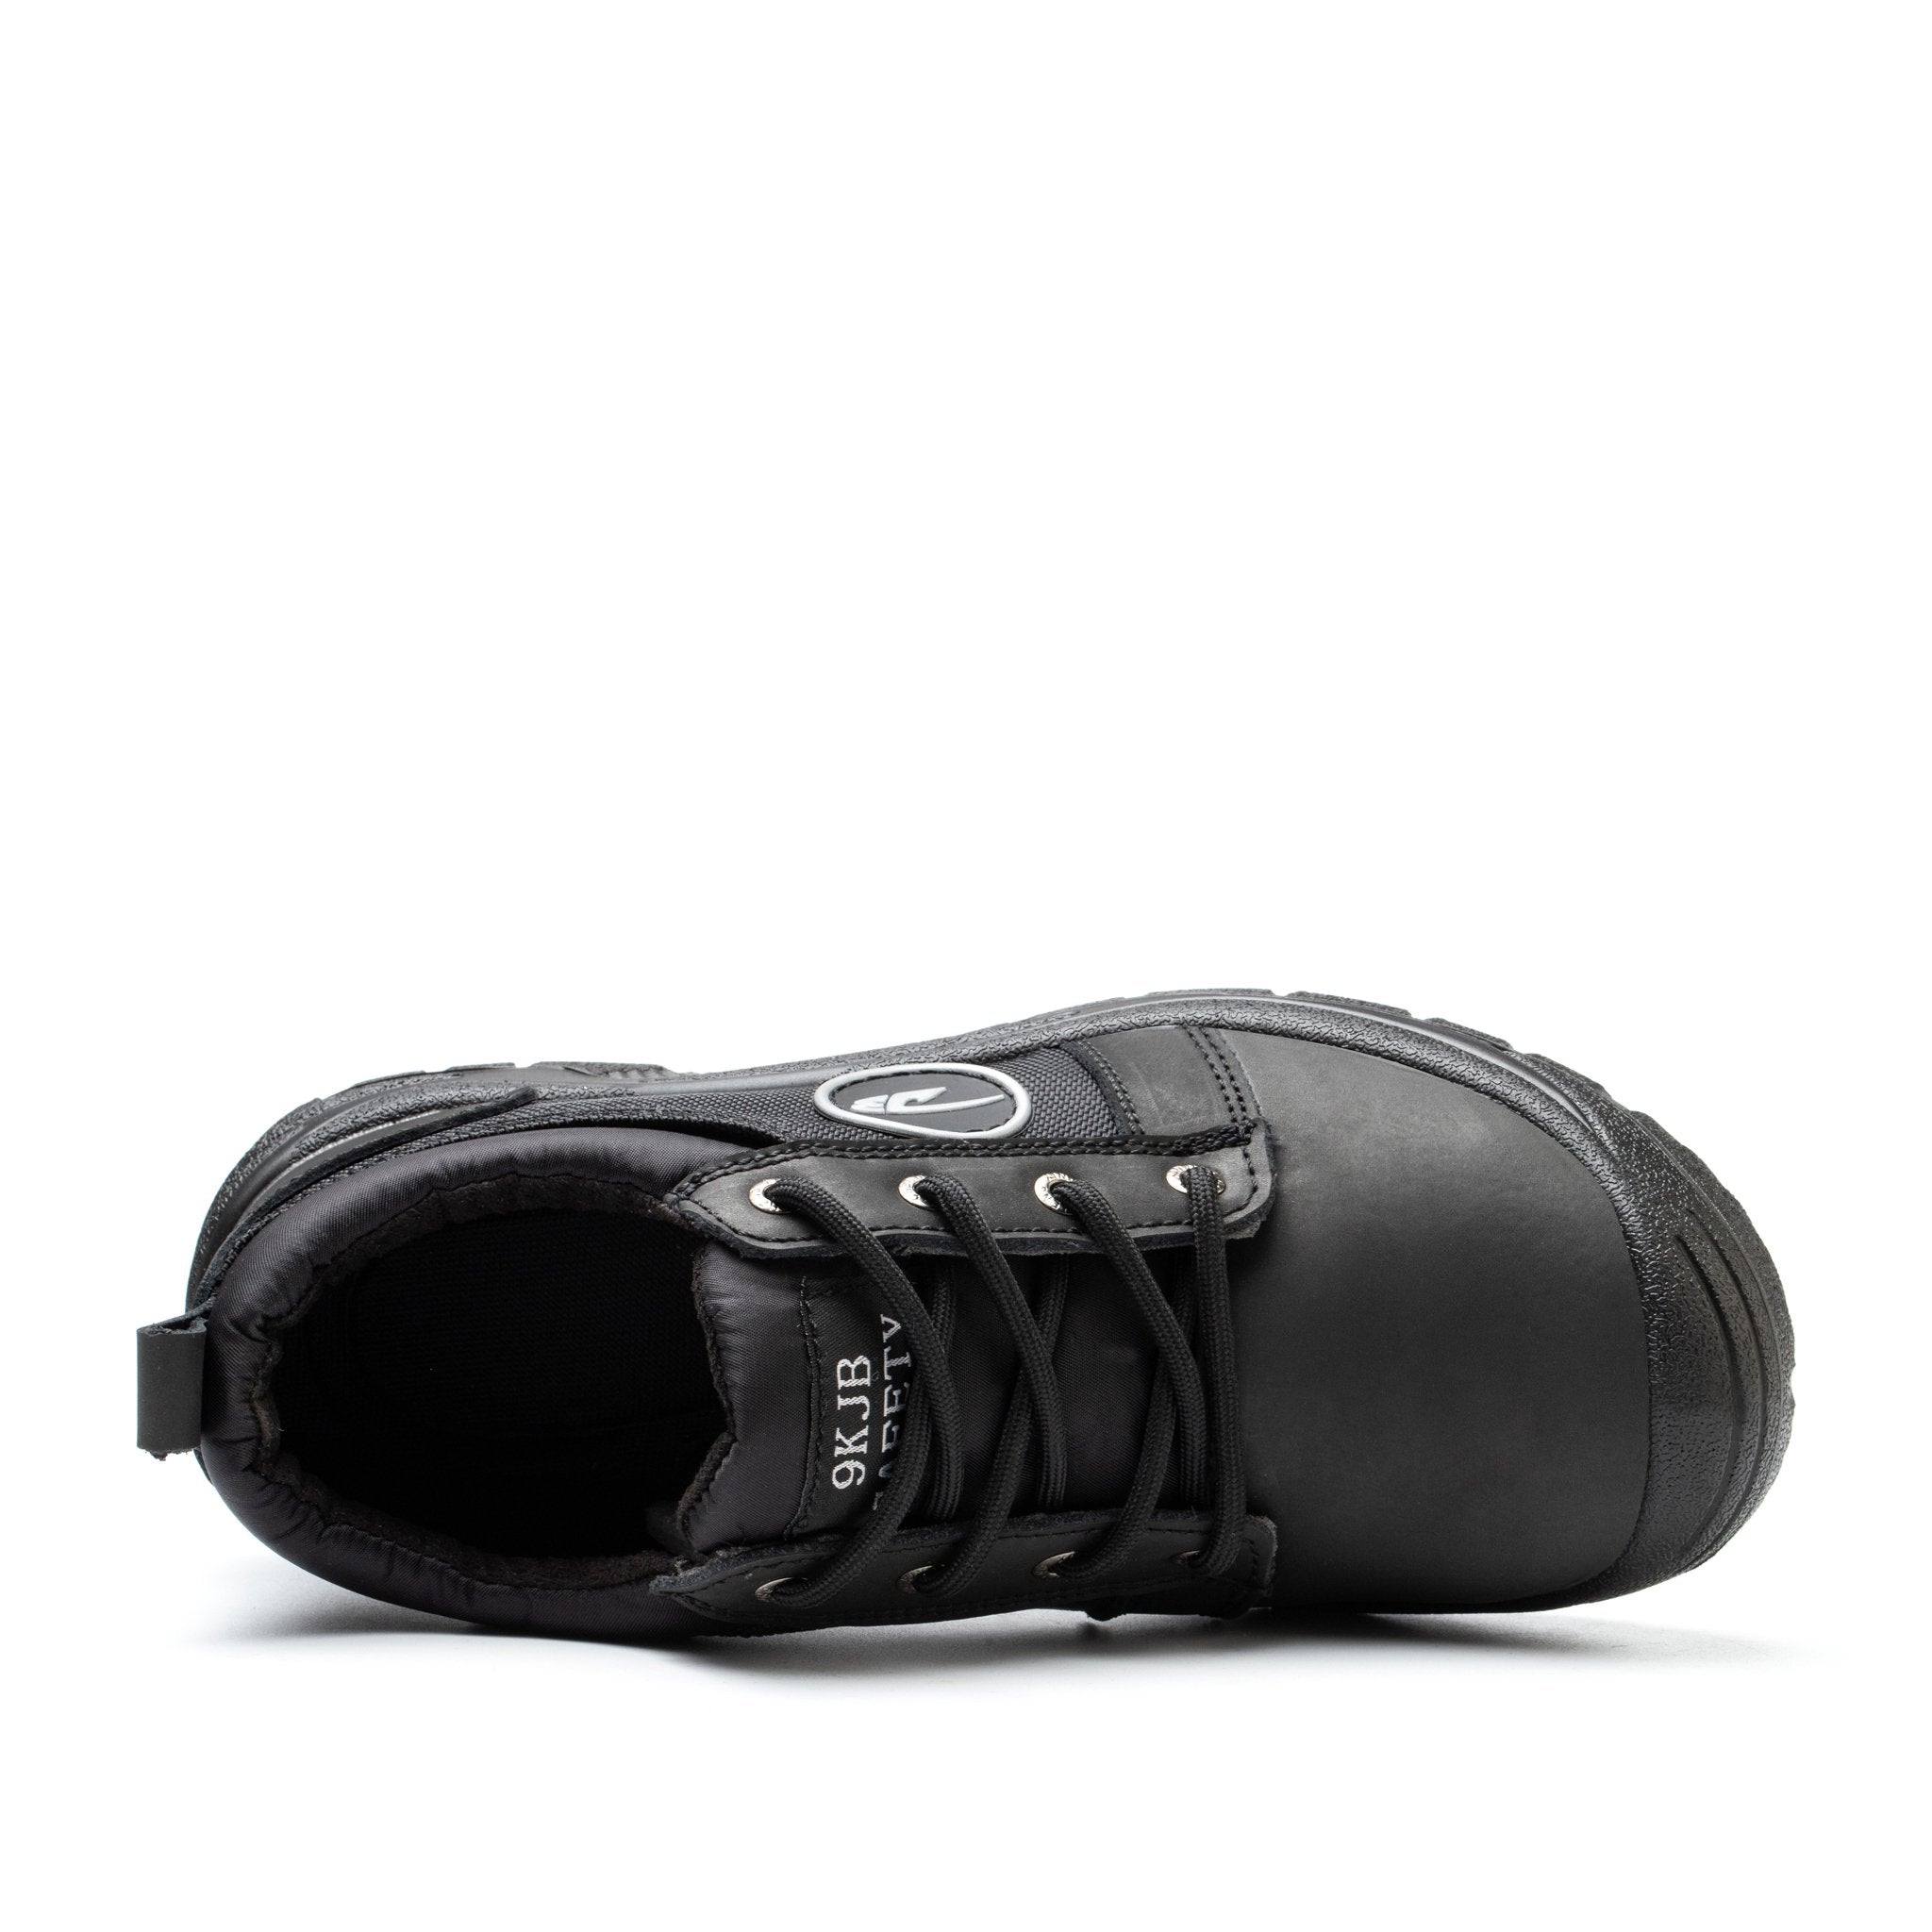 Products - Indestructible Shoes